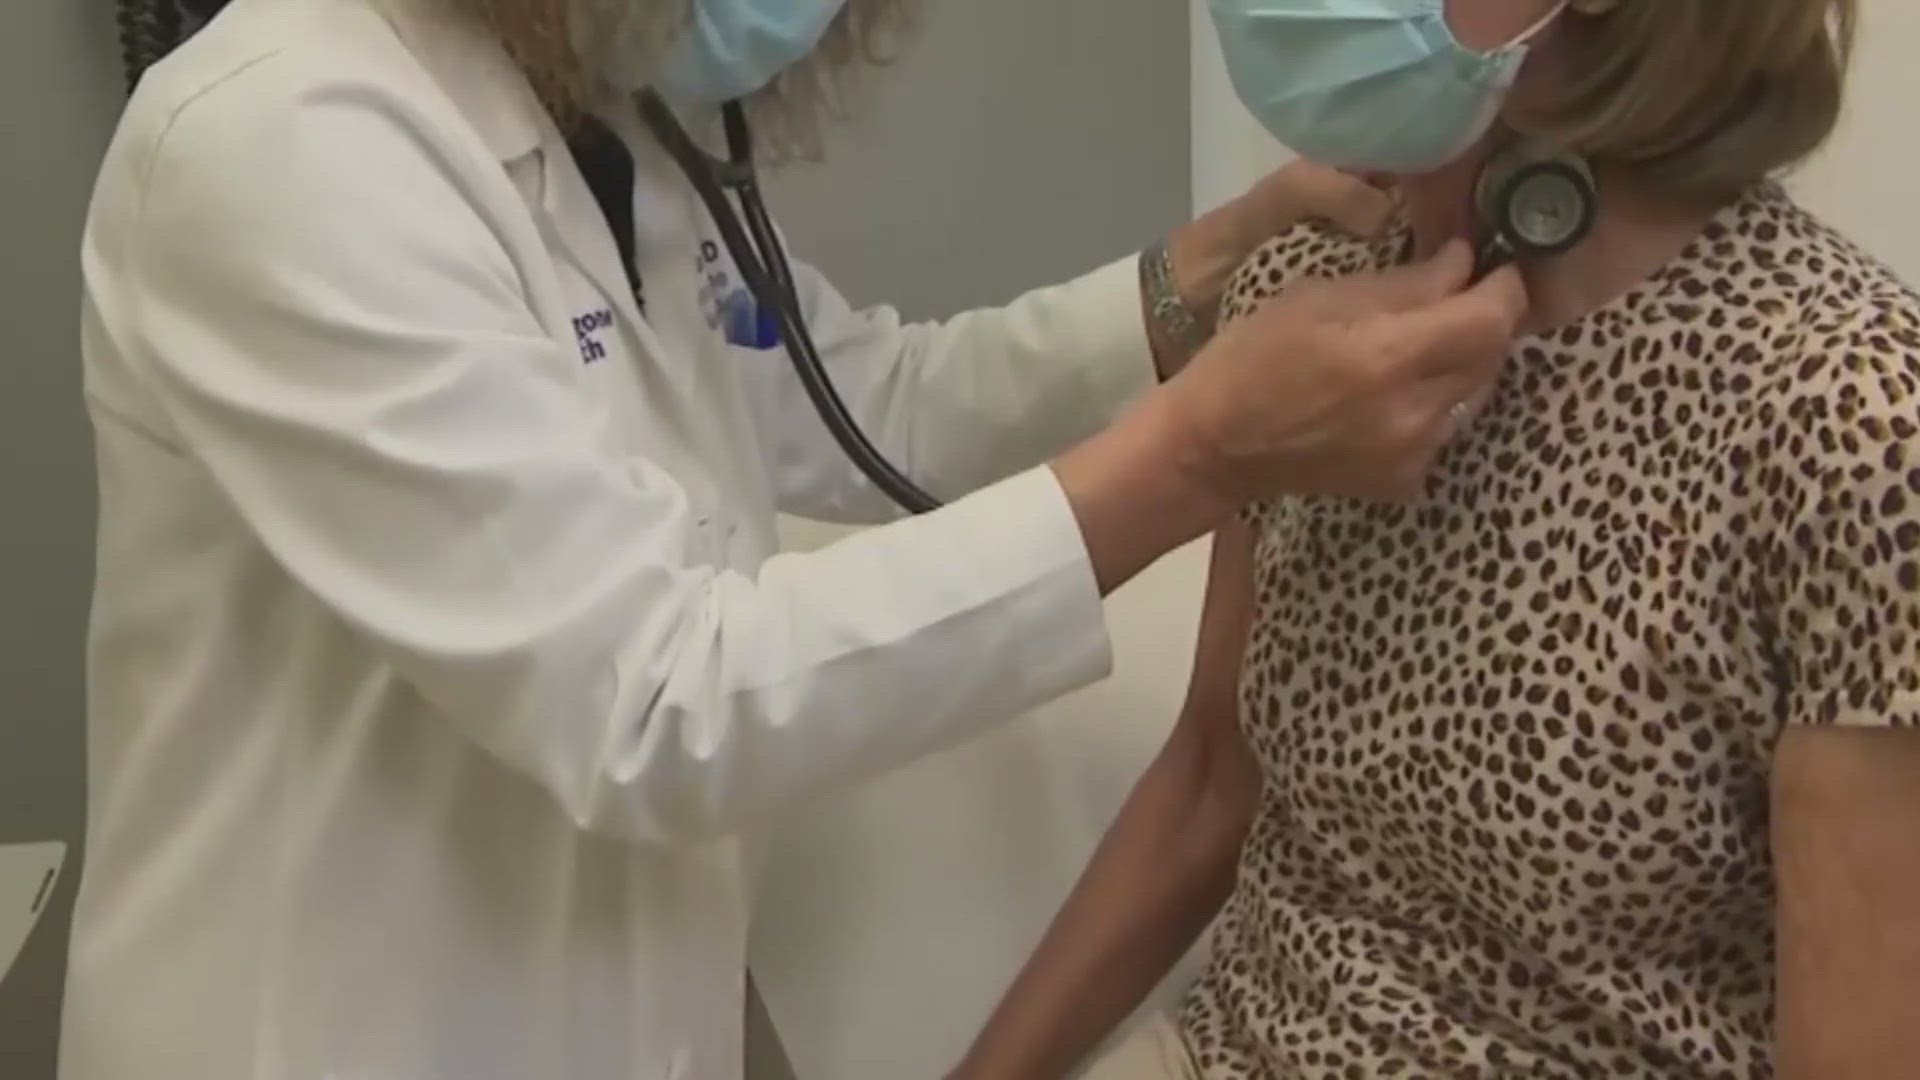 Doctors are keeping a close eye on COVID-19 levels ahead of the respiratory illness season.